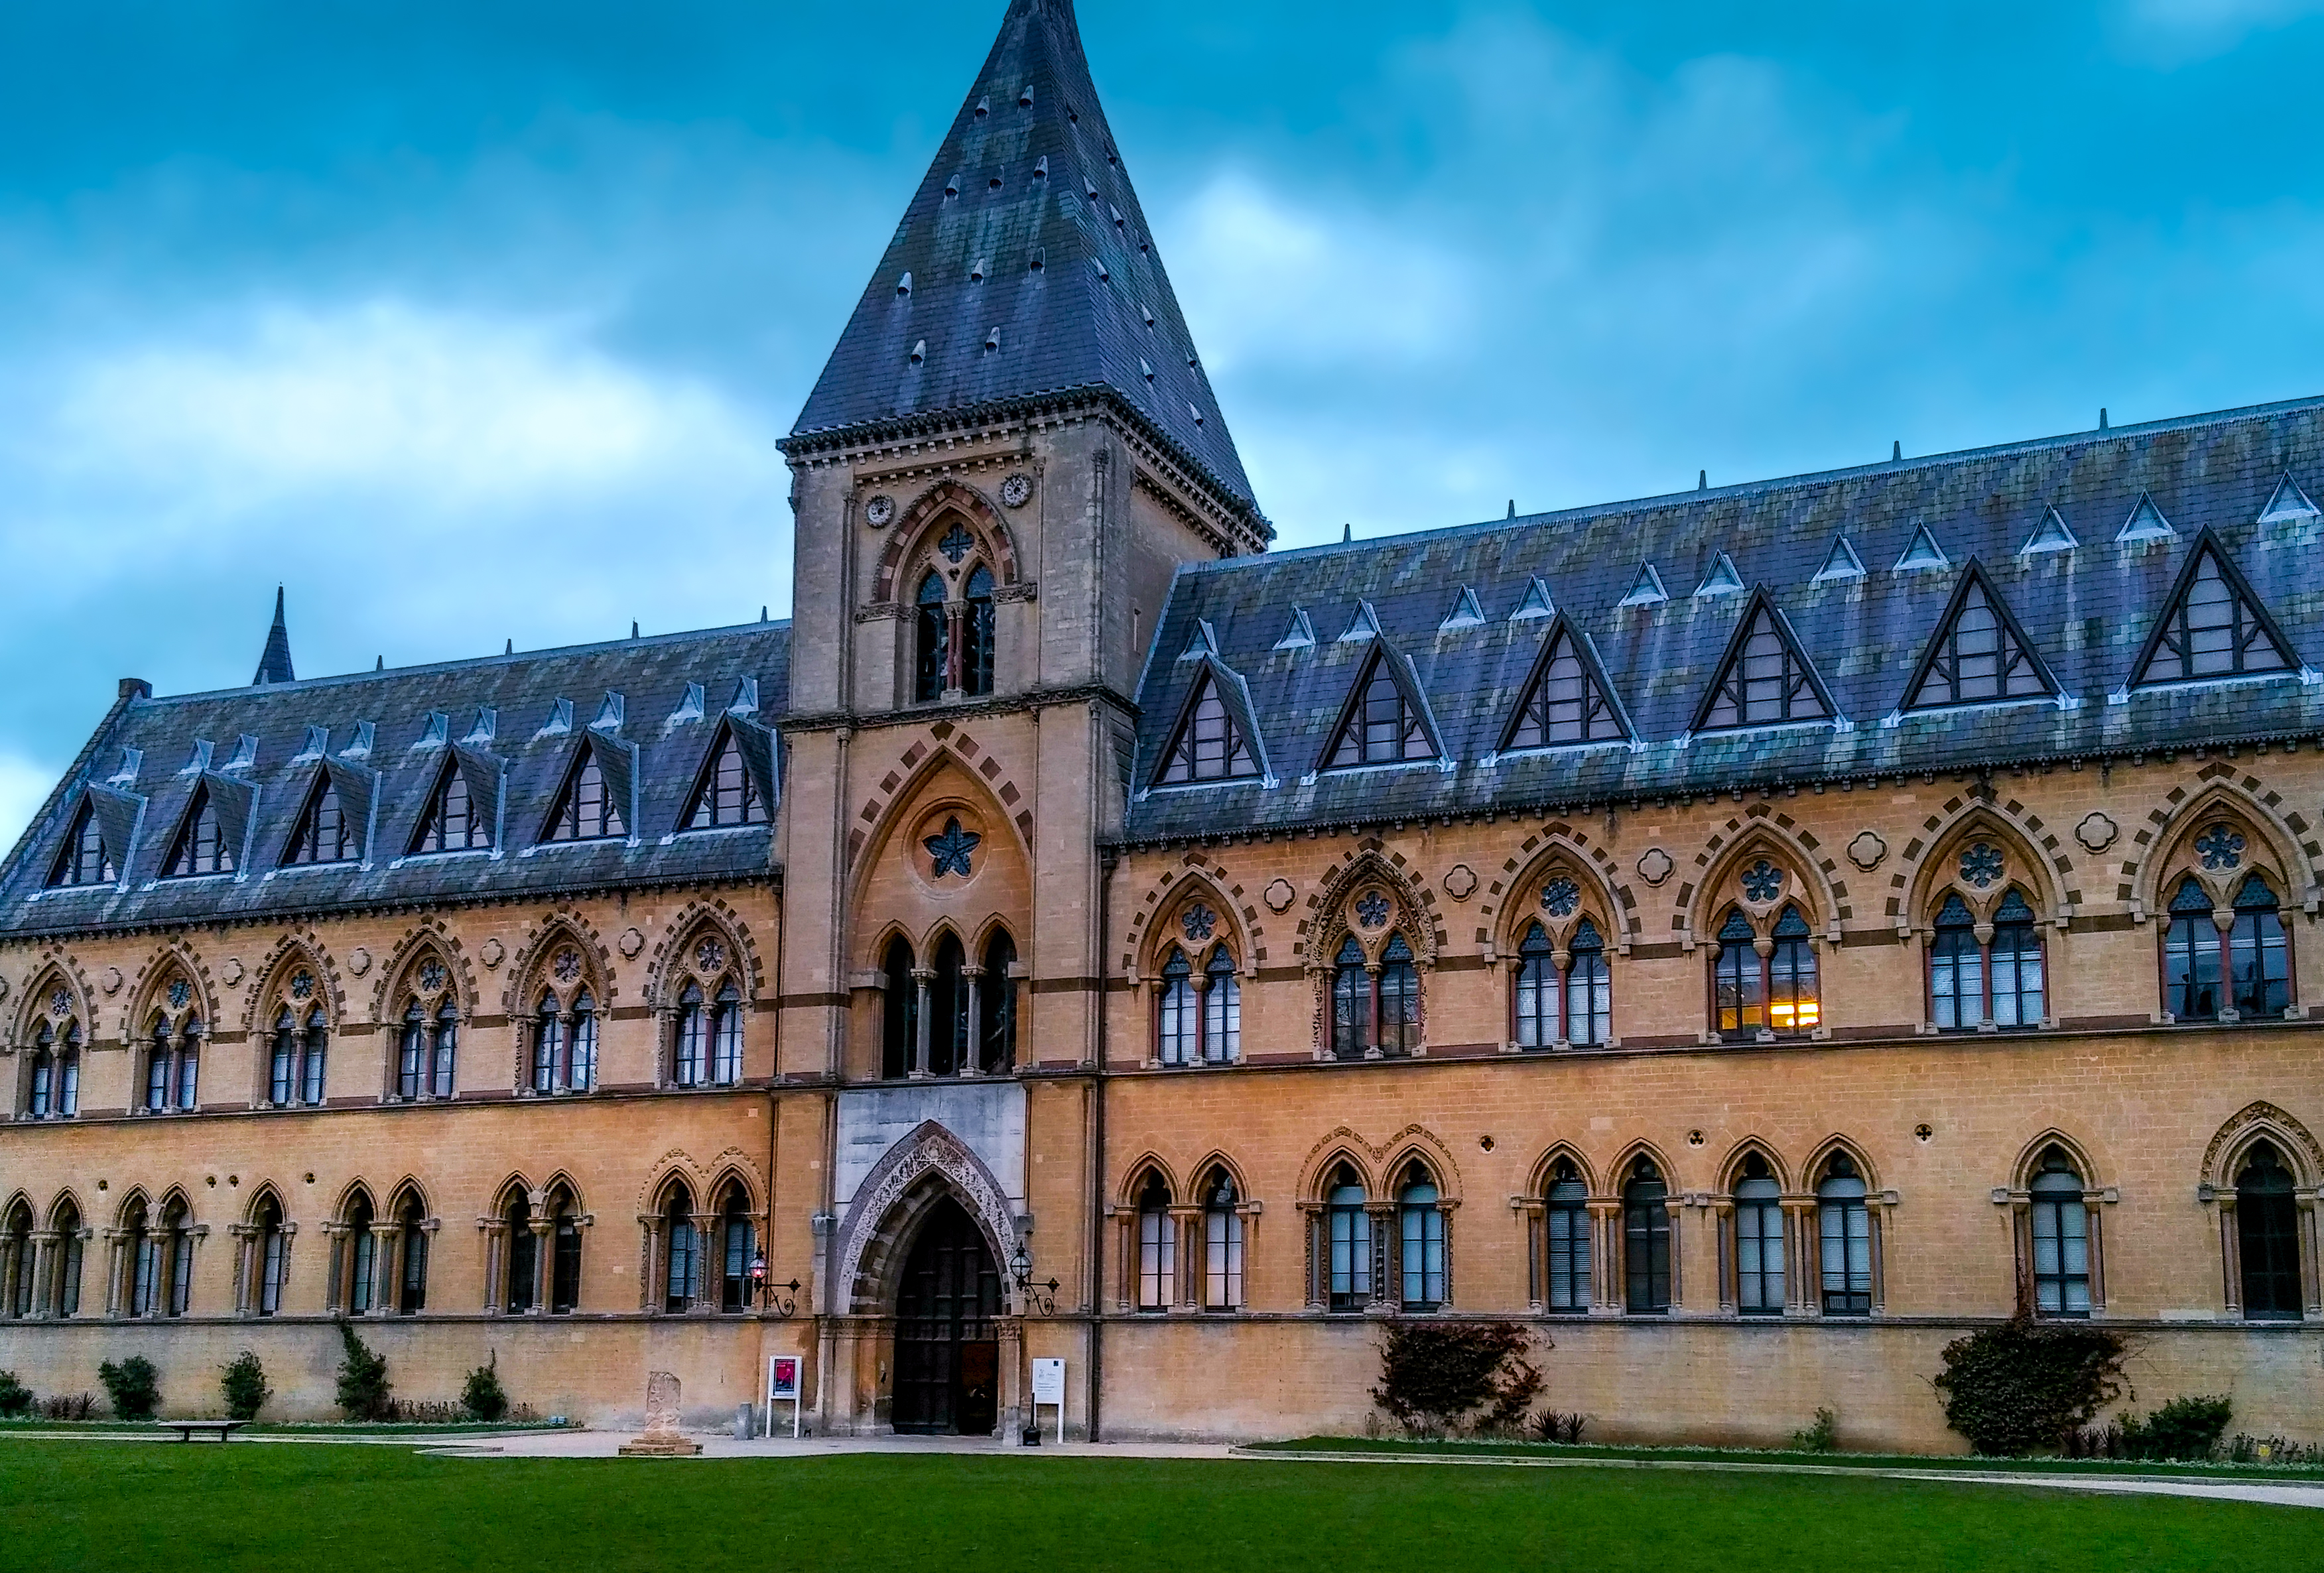 Oxford University Museum of Natural History - Photo by Josh Utley